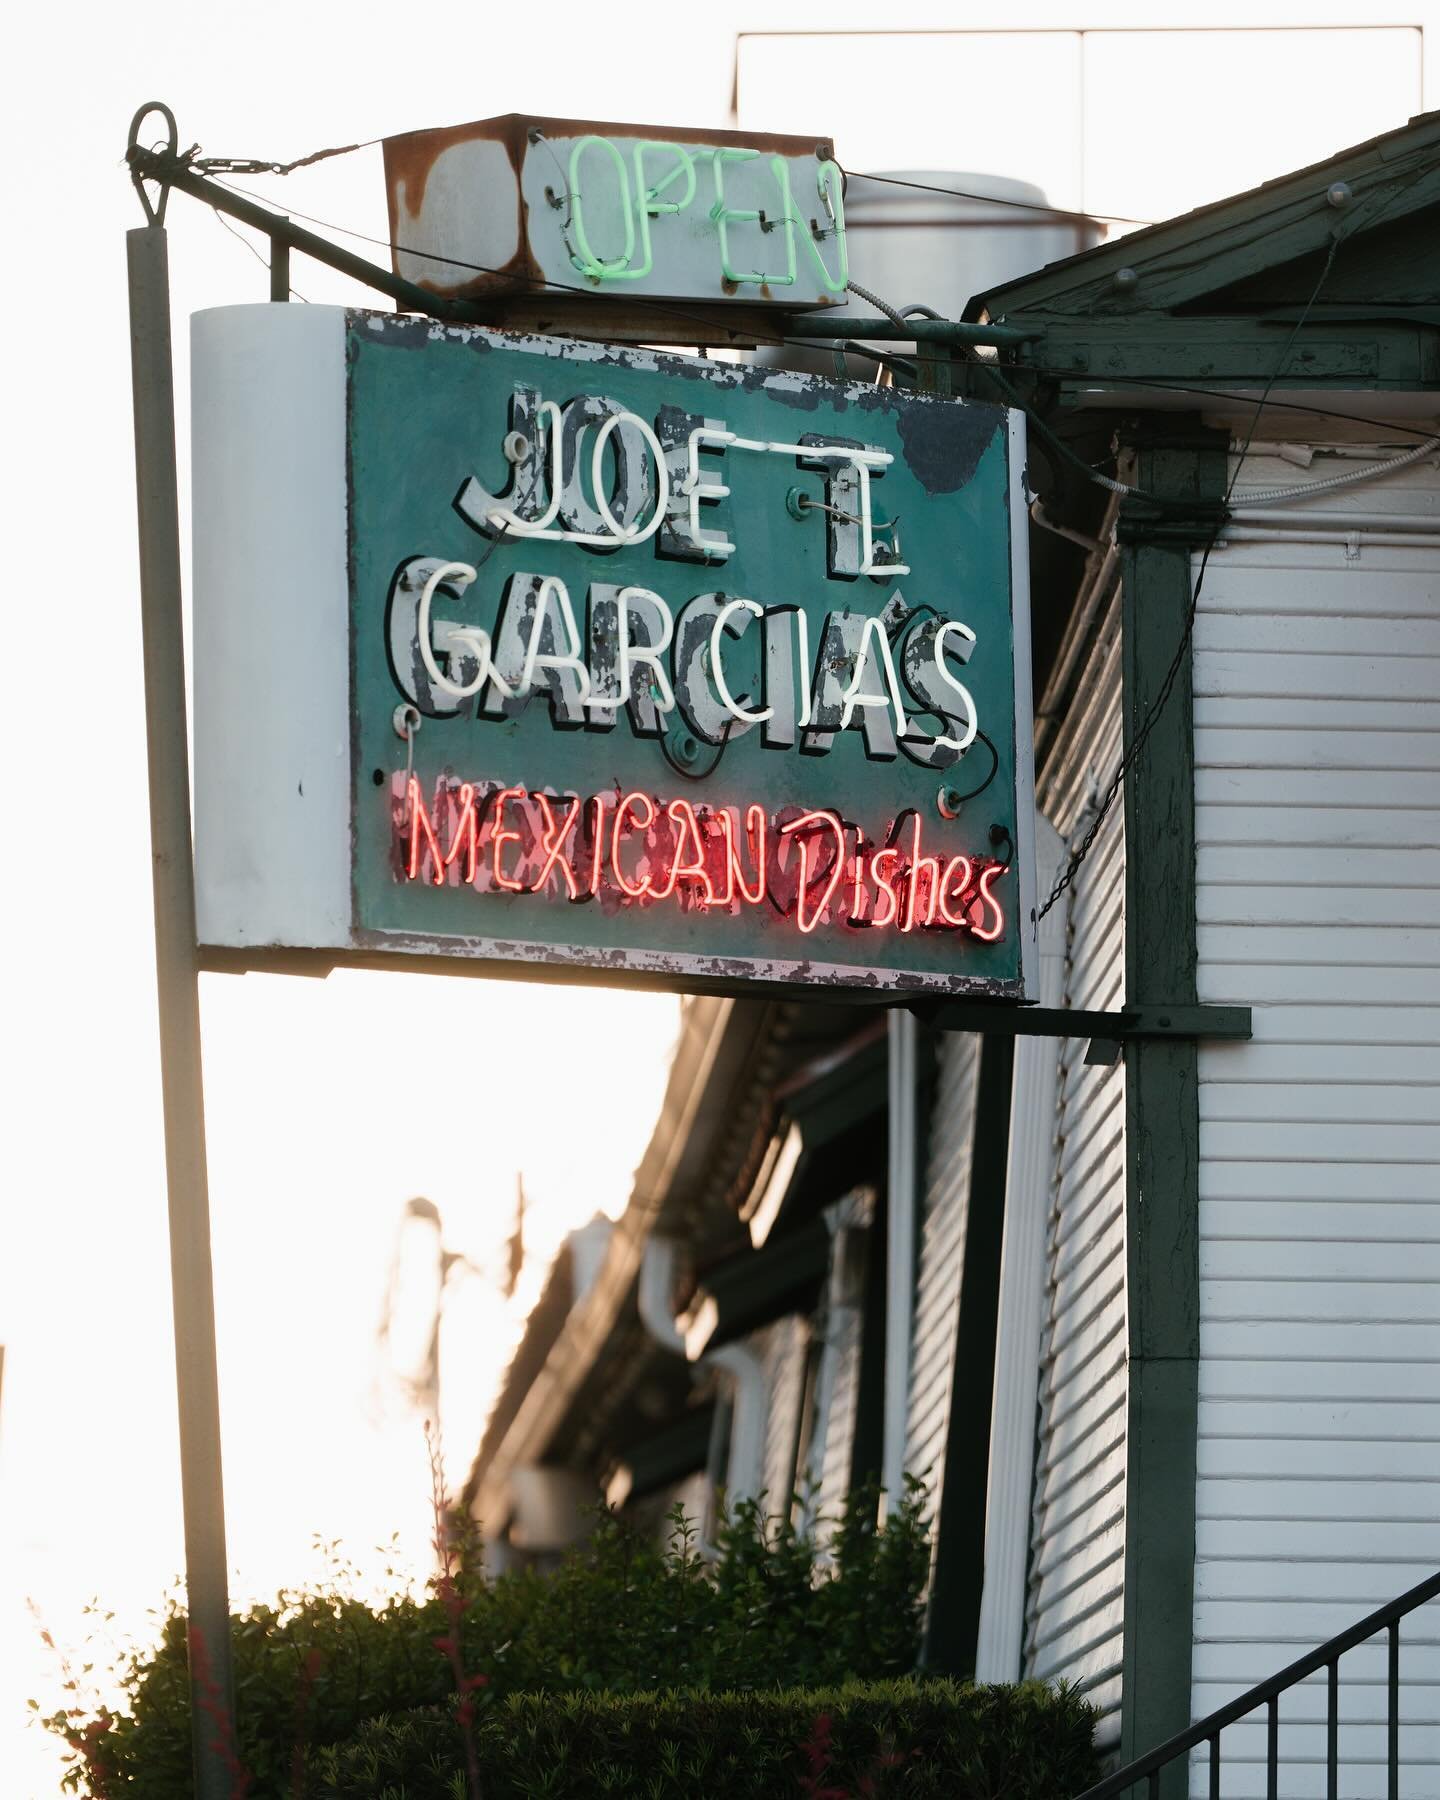 🌺 The one, the only - @joetgarcias_ . If you&rsquo;re at all familiar with Fort Worth, Texas then no introduction is needed here. Get here early, stay late. It&rsquo;s a place like no other.

👇👇Answer me this: team fajitas or team enchiladas?

#fo